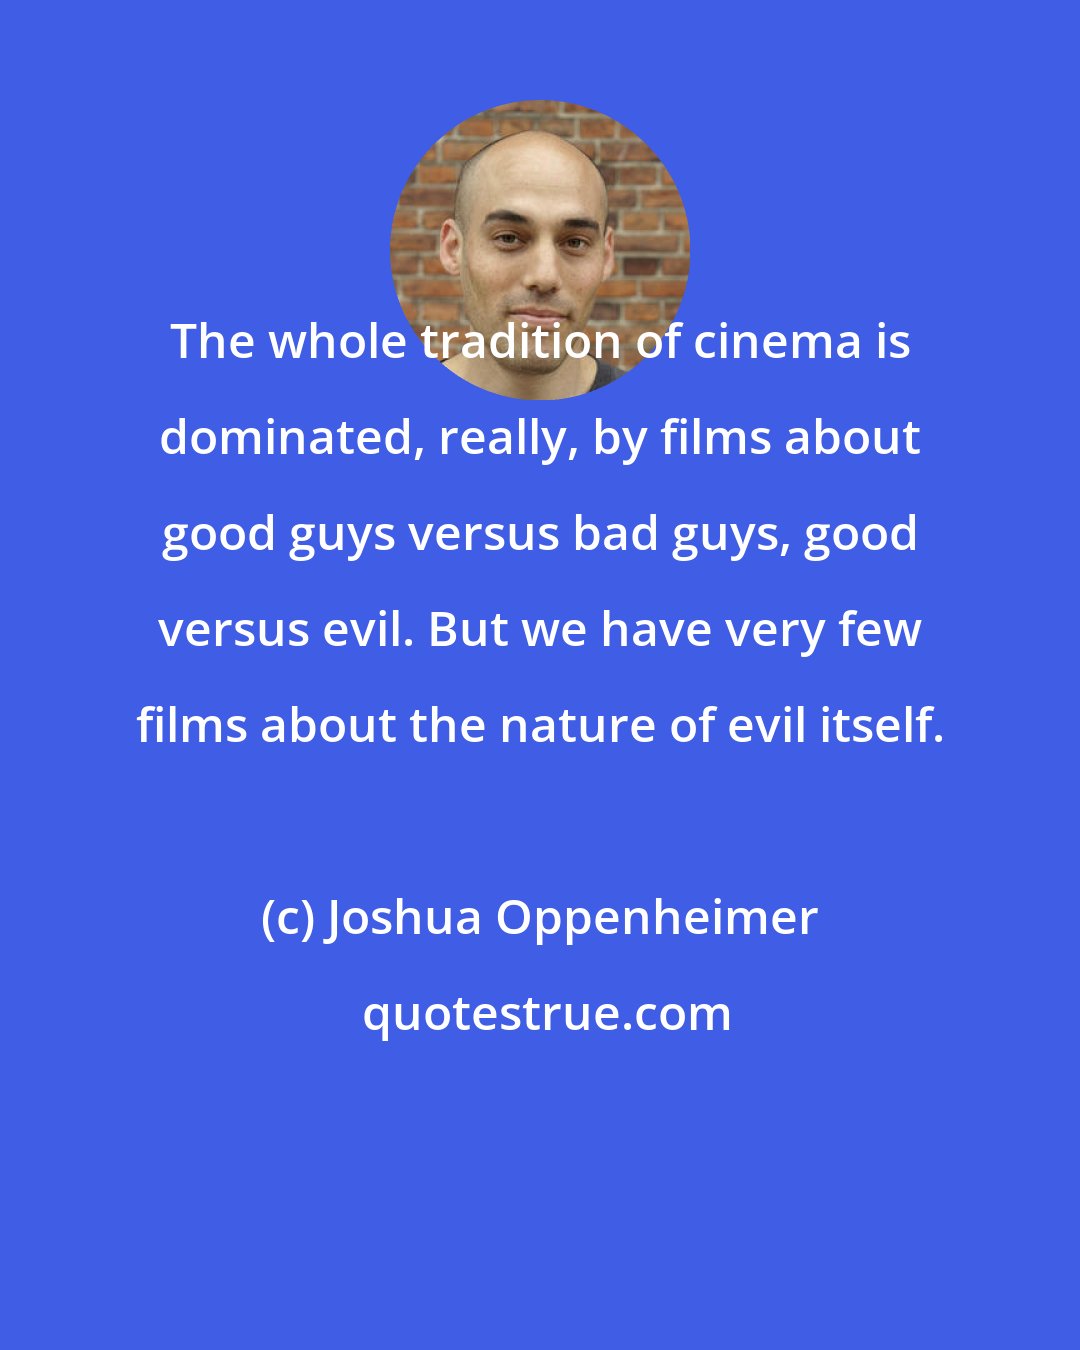 Joshua Oppenheimer: The whole tradition of cinema is dominated, really, by films about good guys versus bad guys, good versus evil. But we have very few films about the nature of evil itself.